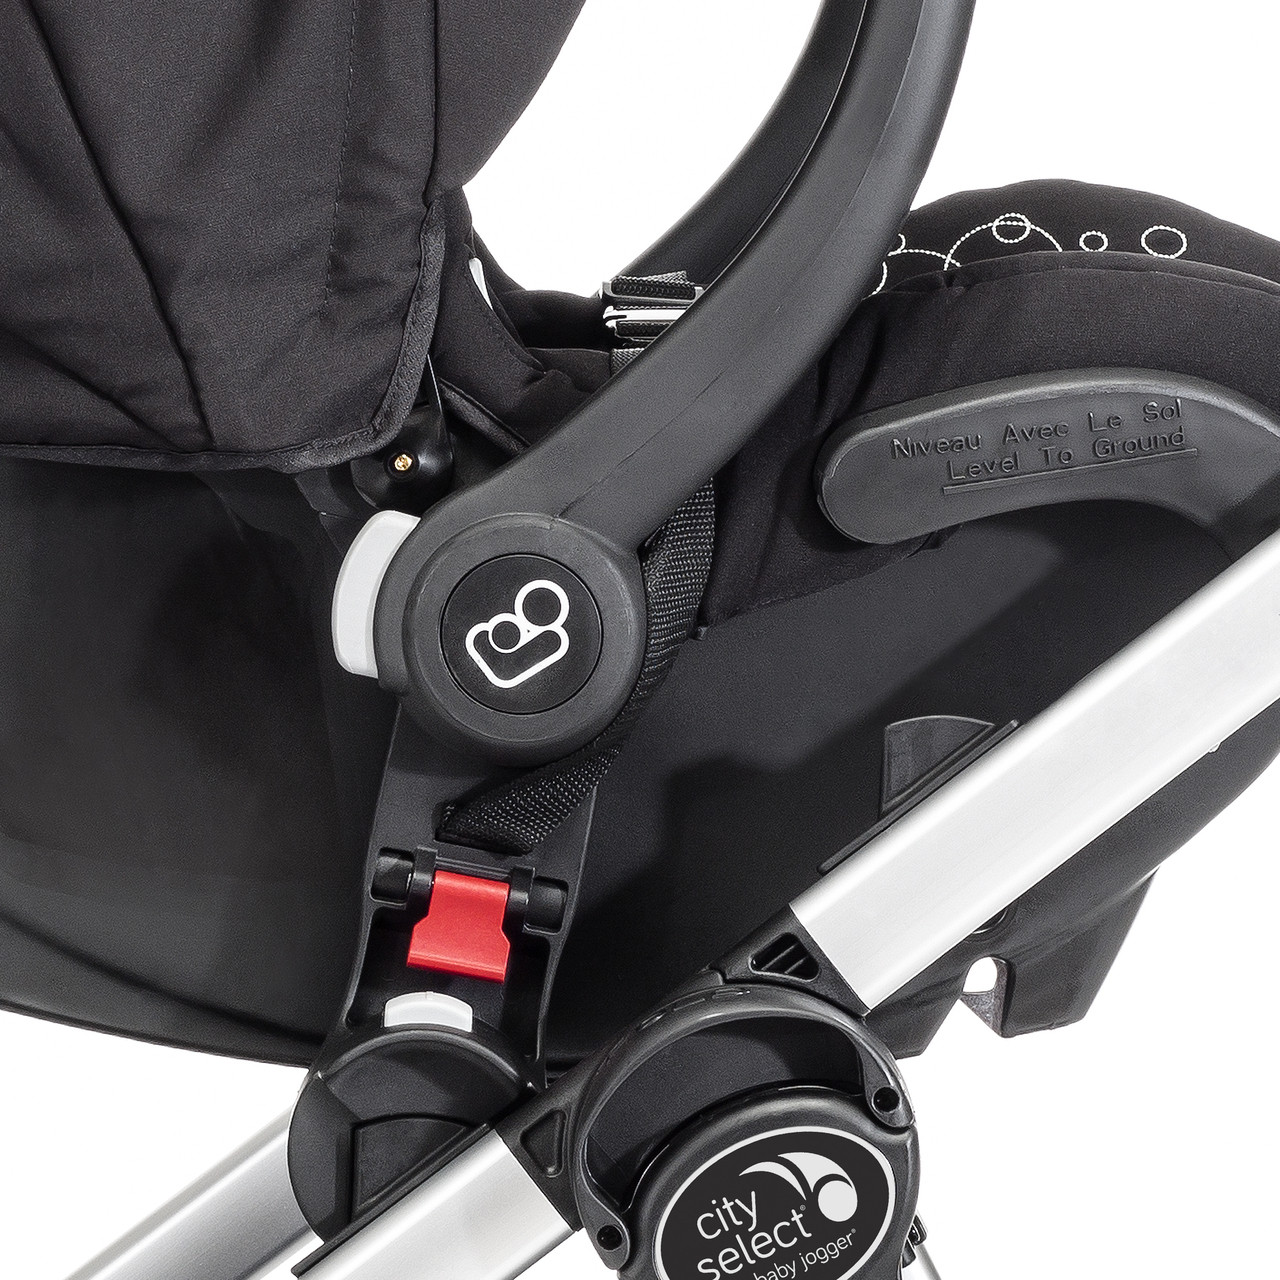 Second Seat Attachment For Baby Jogger City Select LUX Stroller w/ Adapters 